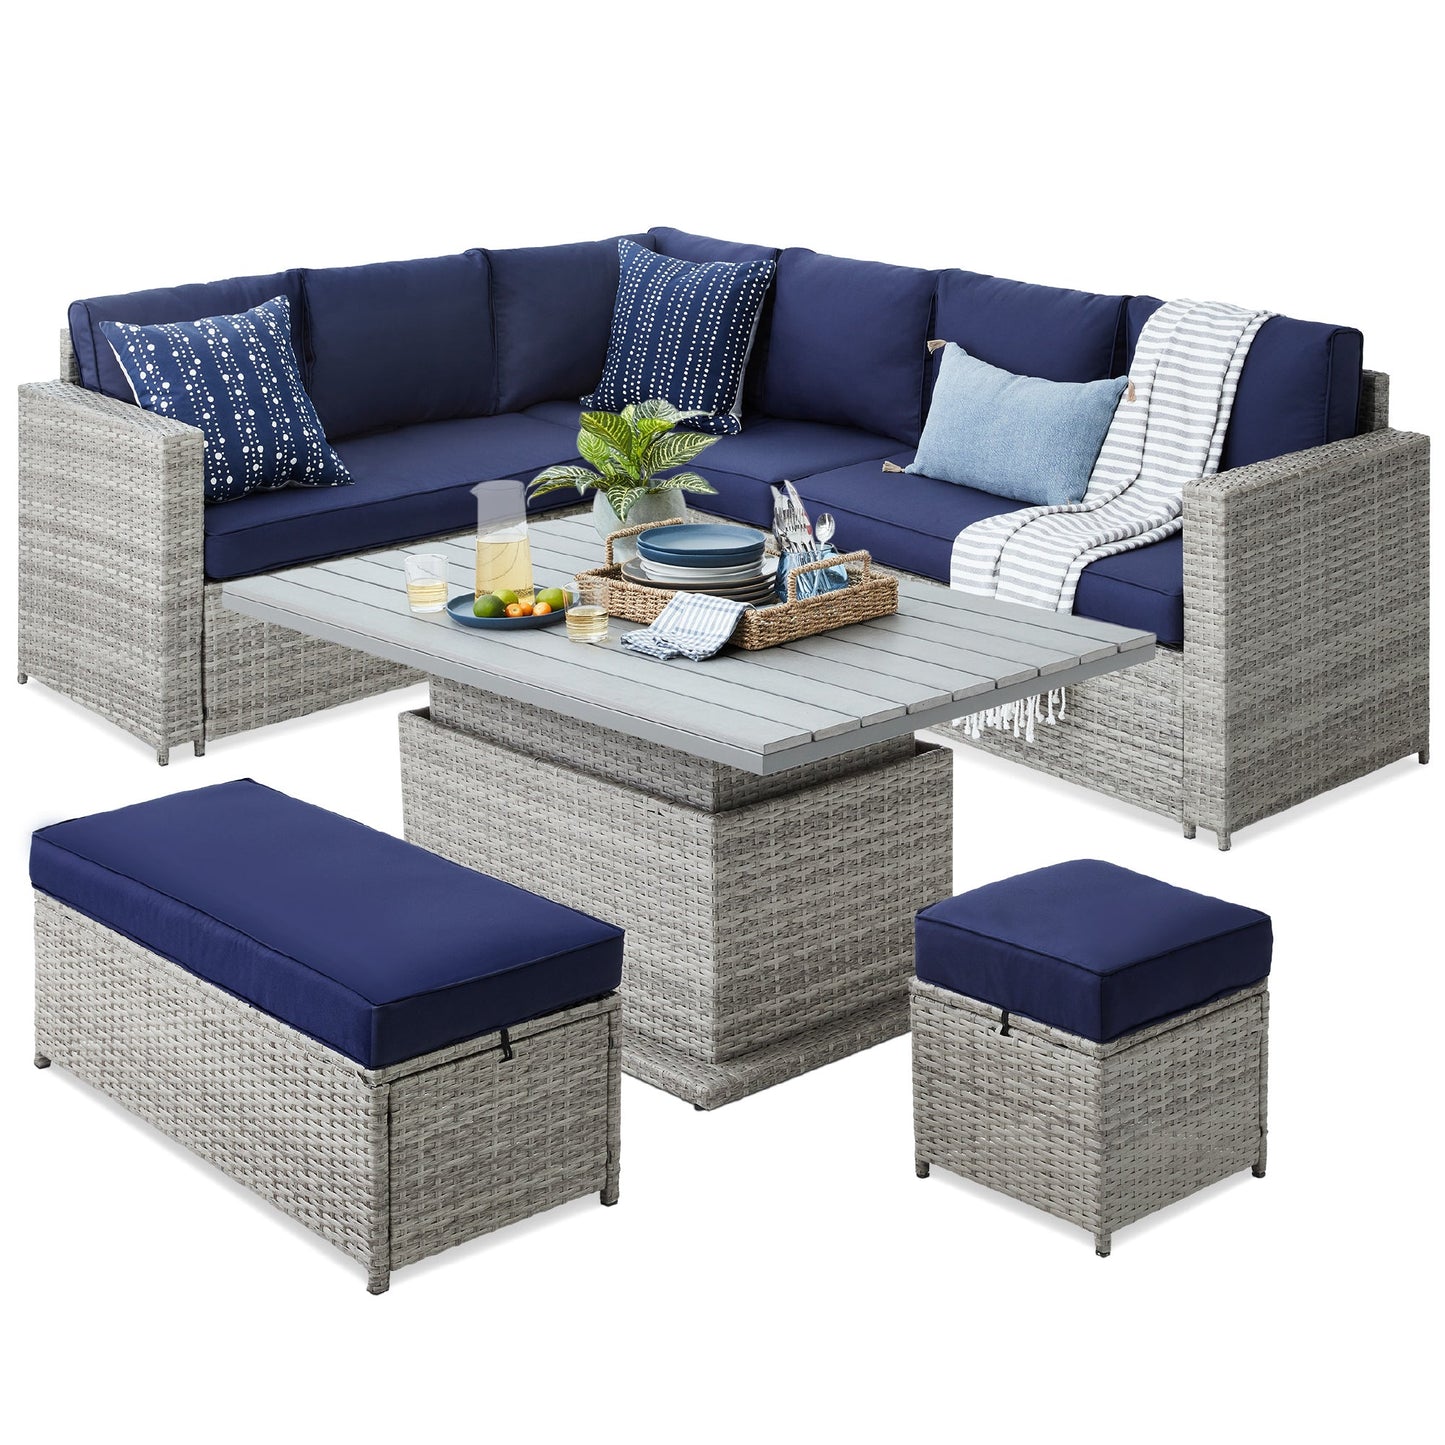 6-Piece Wicker Patio Furniture Set w/ Height-Adjustable Dining Table